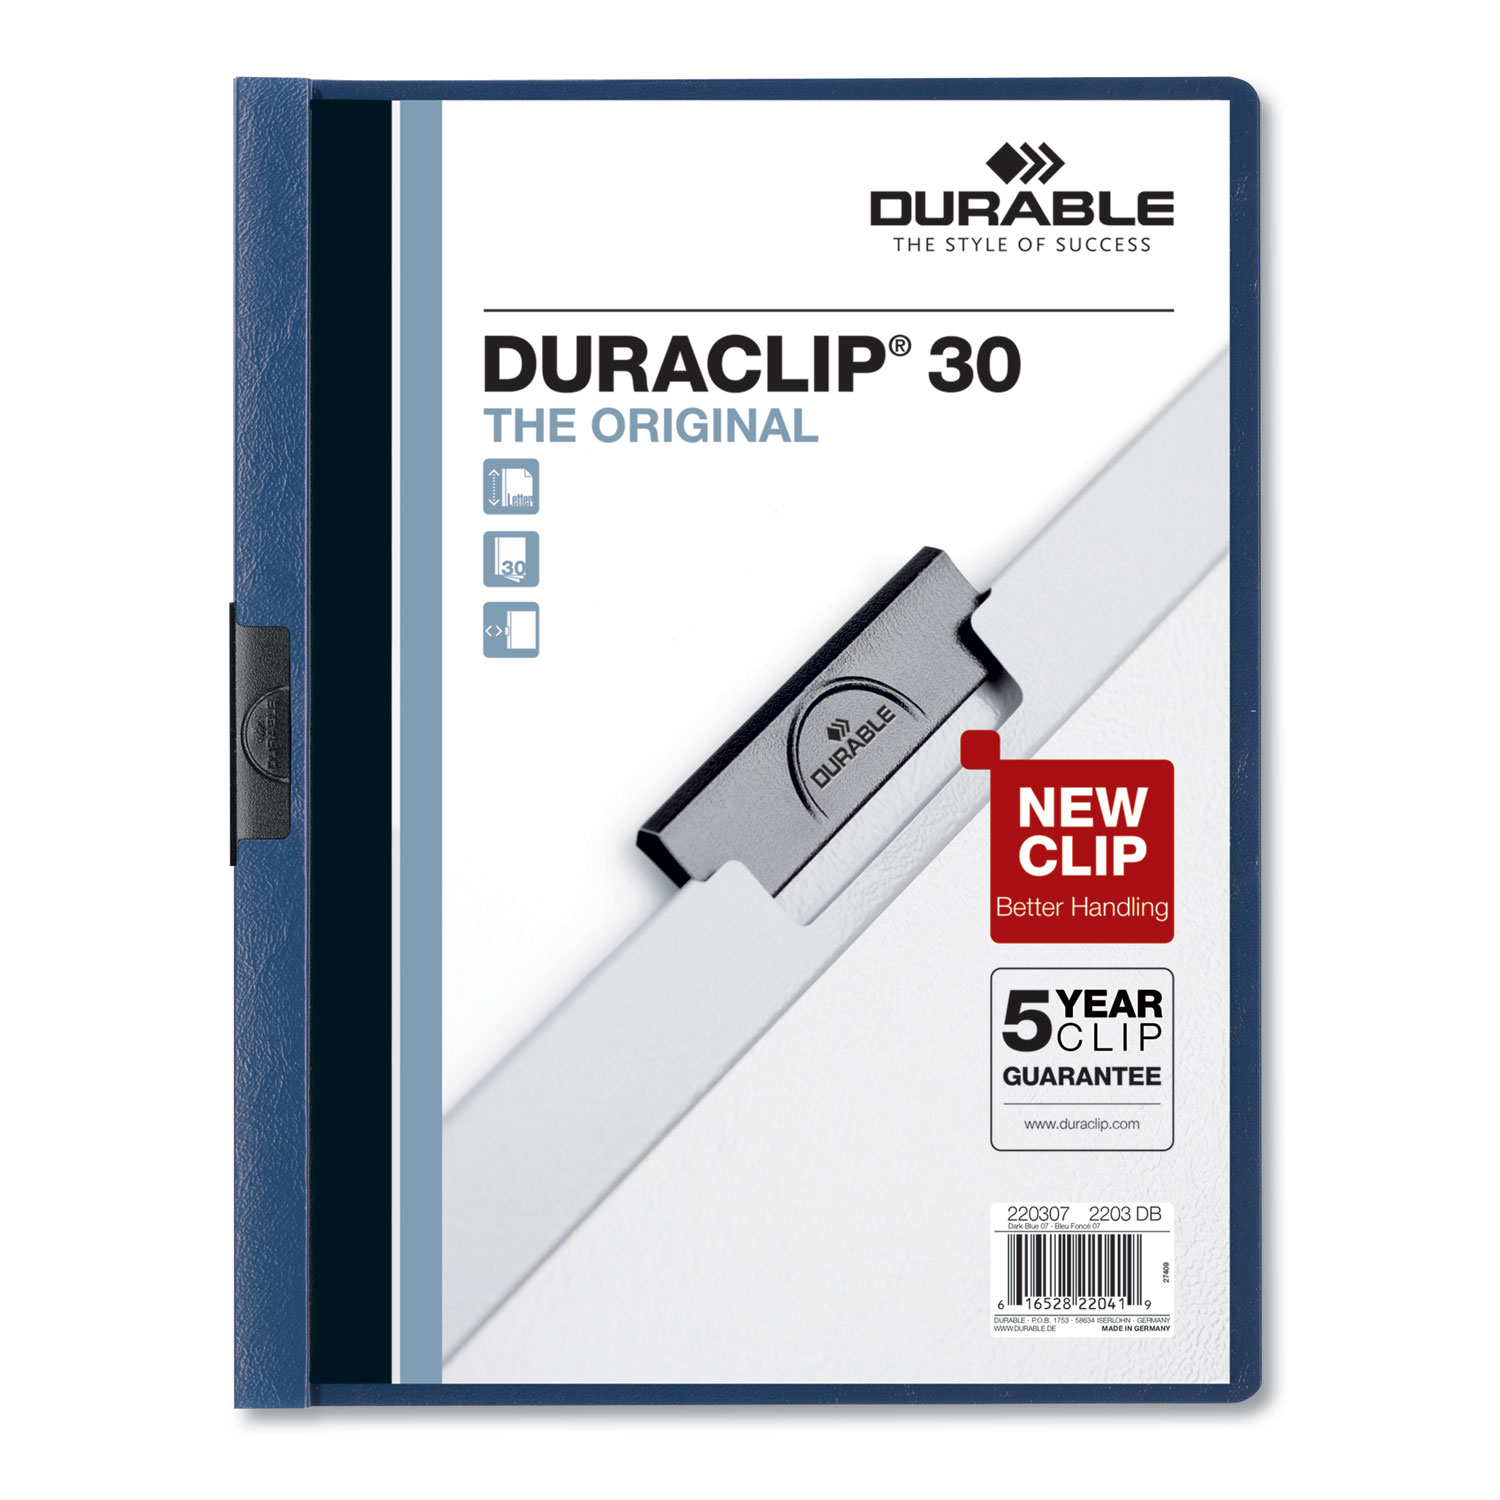  Durable 220307 Vinyl DuraClip Report Cover, Letter, Holds 30 Pages, Clear/Dark Blue, 25/Box (DBL220307) 